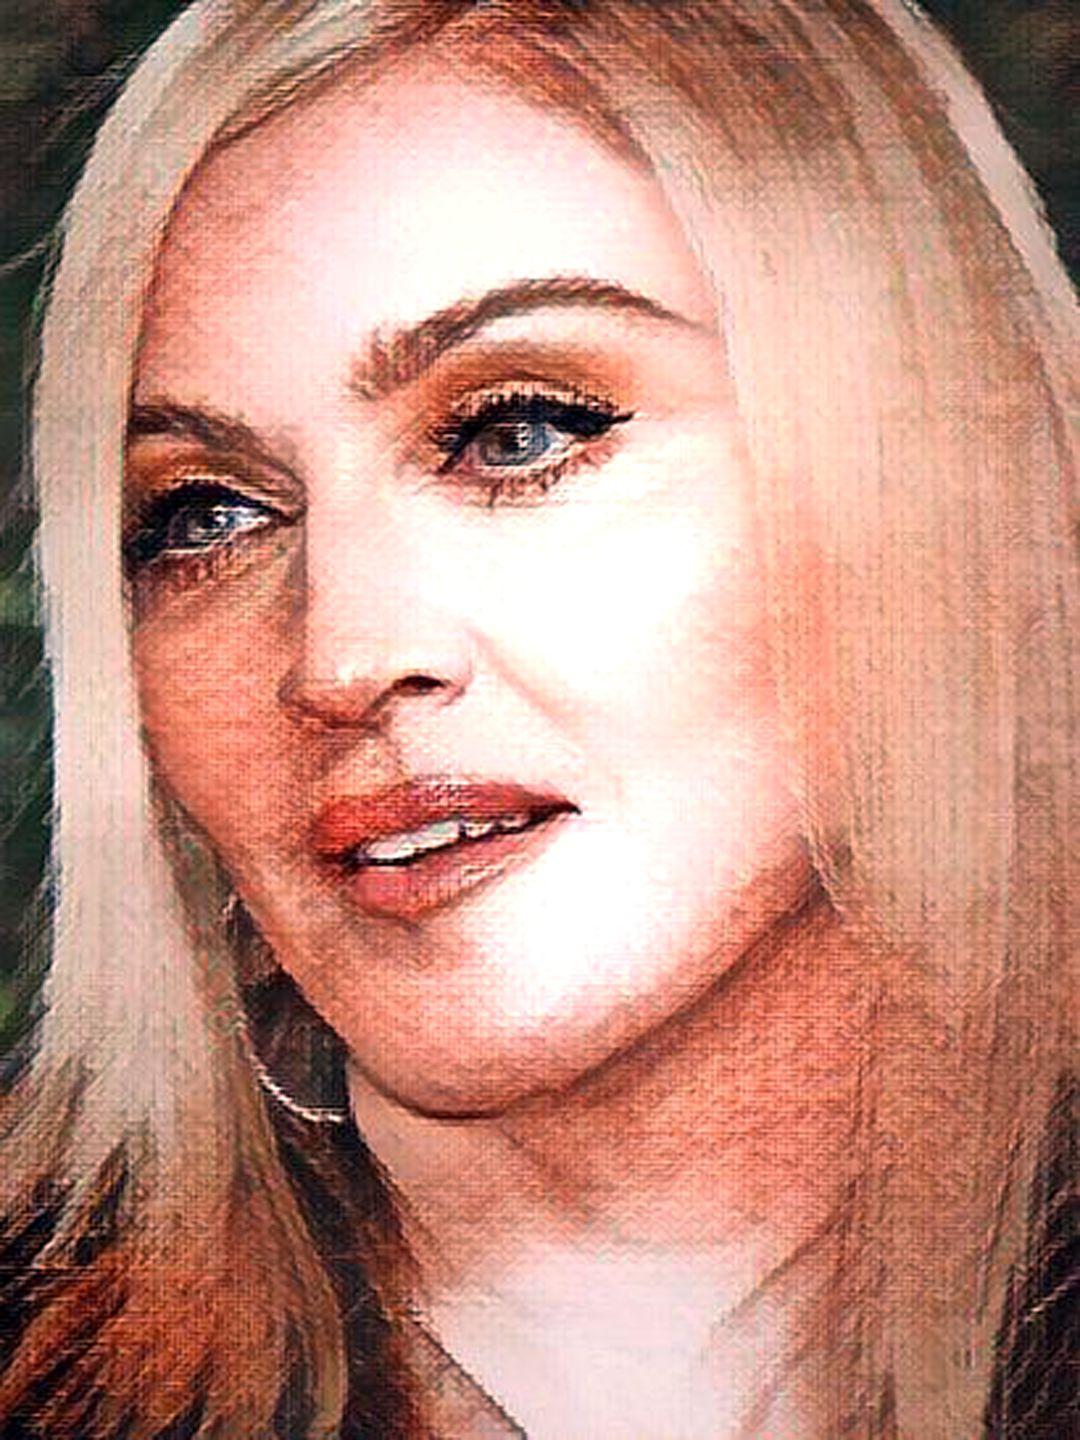 Amateur Candid Topless Beach - Madonna # 36 - Celeb ART - Beautiful Artworks of Celebrities, Footballers,  Politicians and Famous People in World | OpenSea